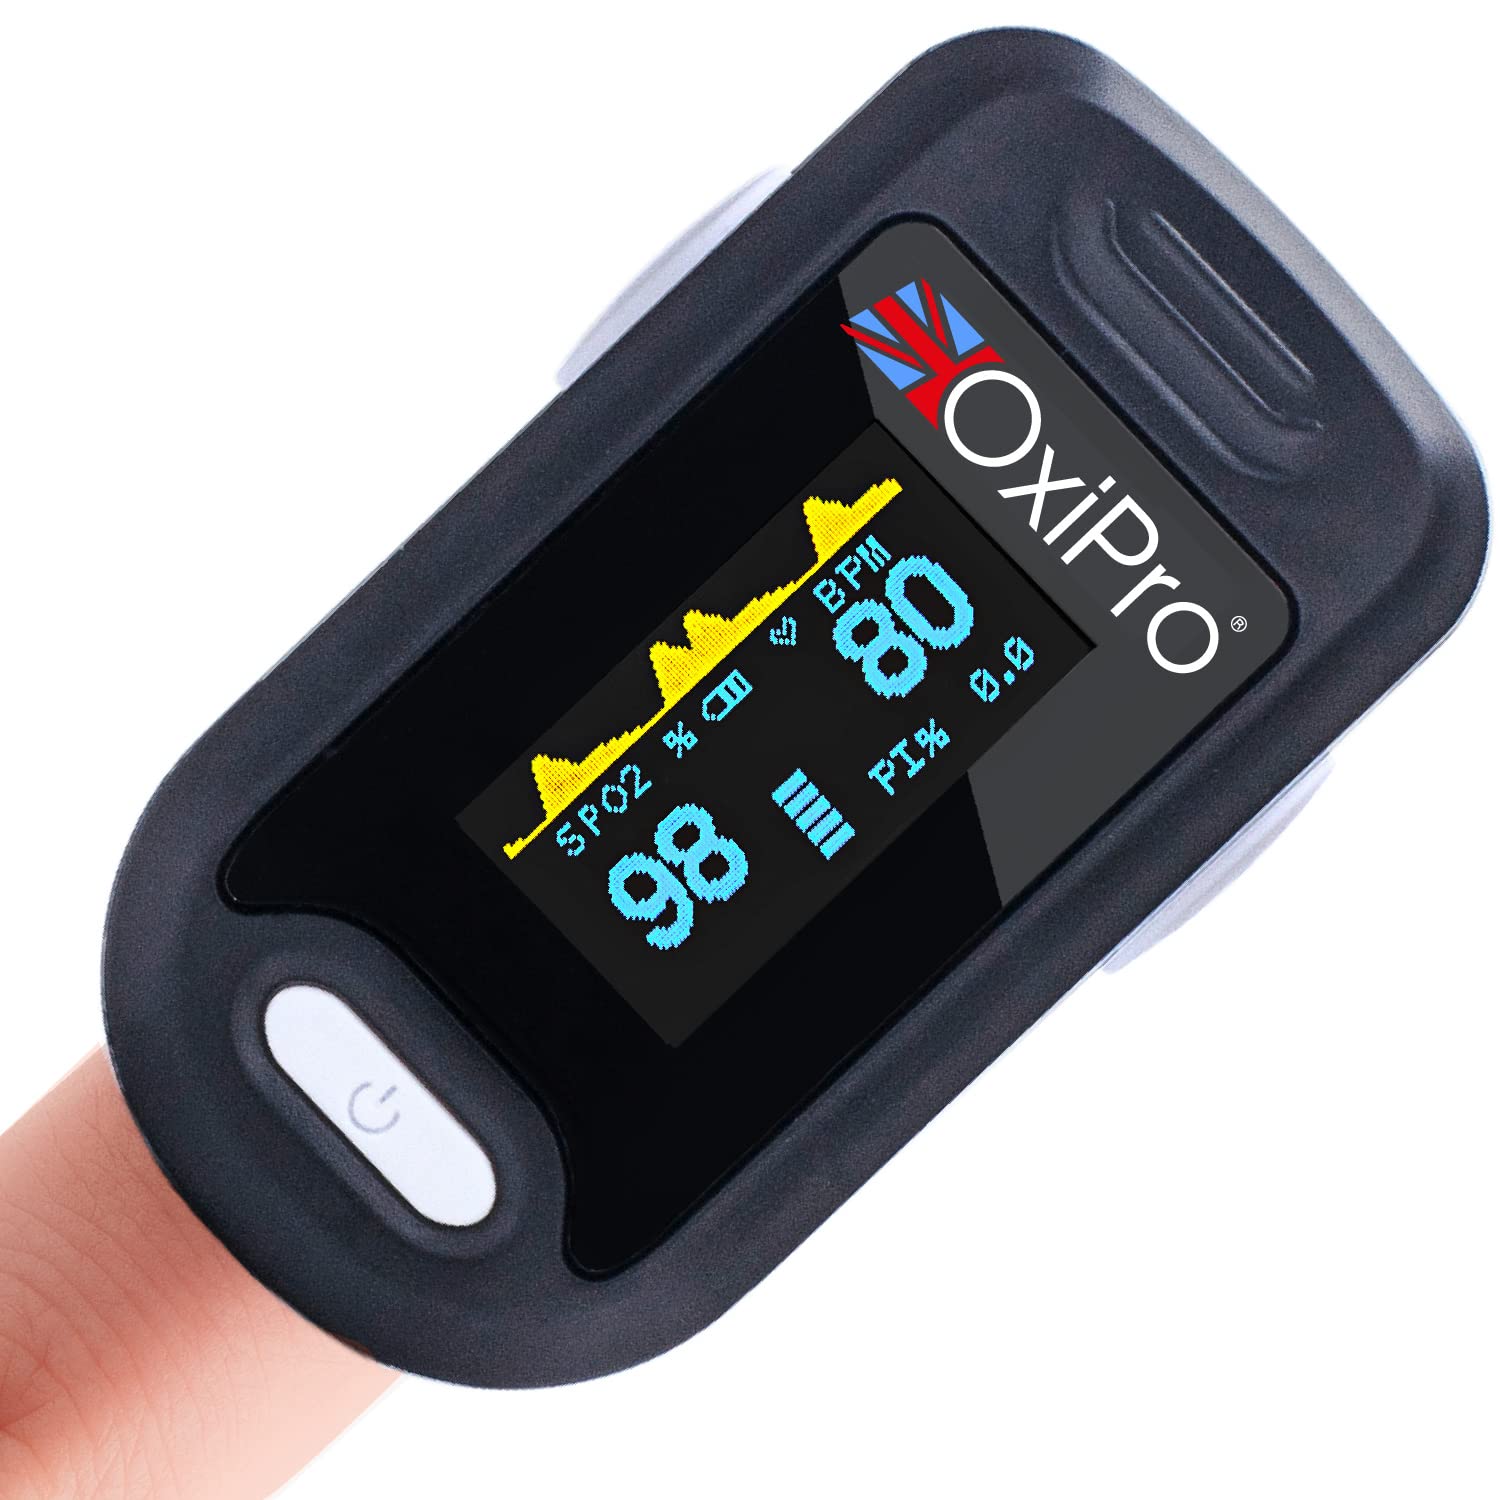 OxiPro 2 - NHS Supplied Pulse Oximeter